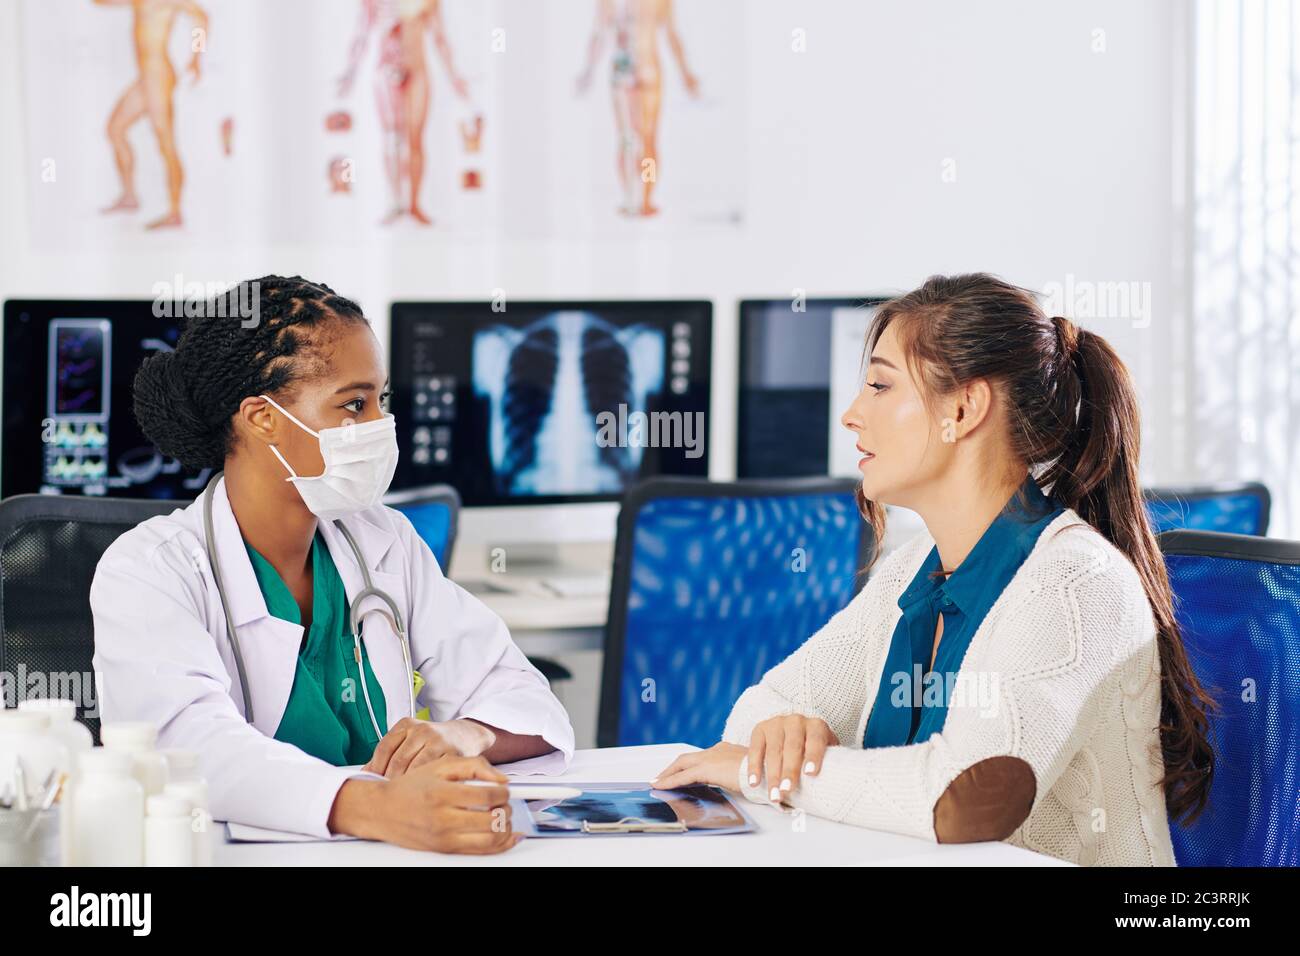 General practitioner in white labcoat and medical mask sitting at desk and talking to patient Stock Photo